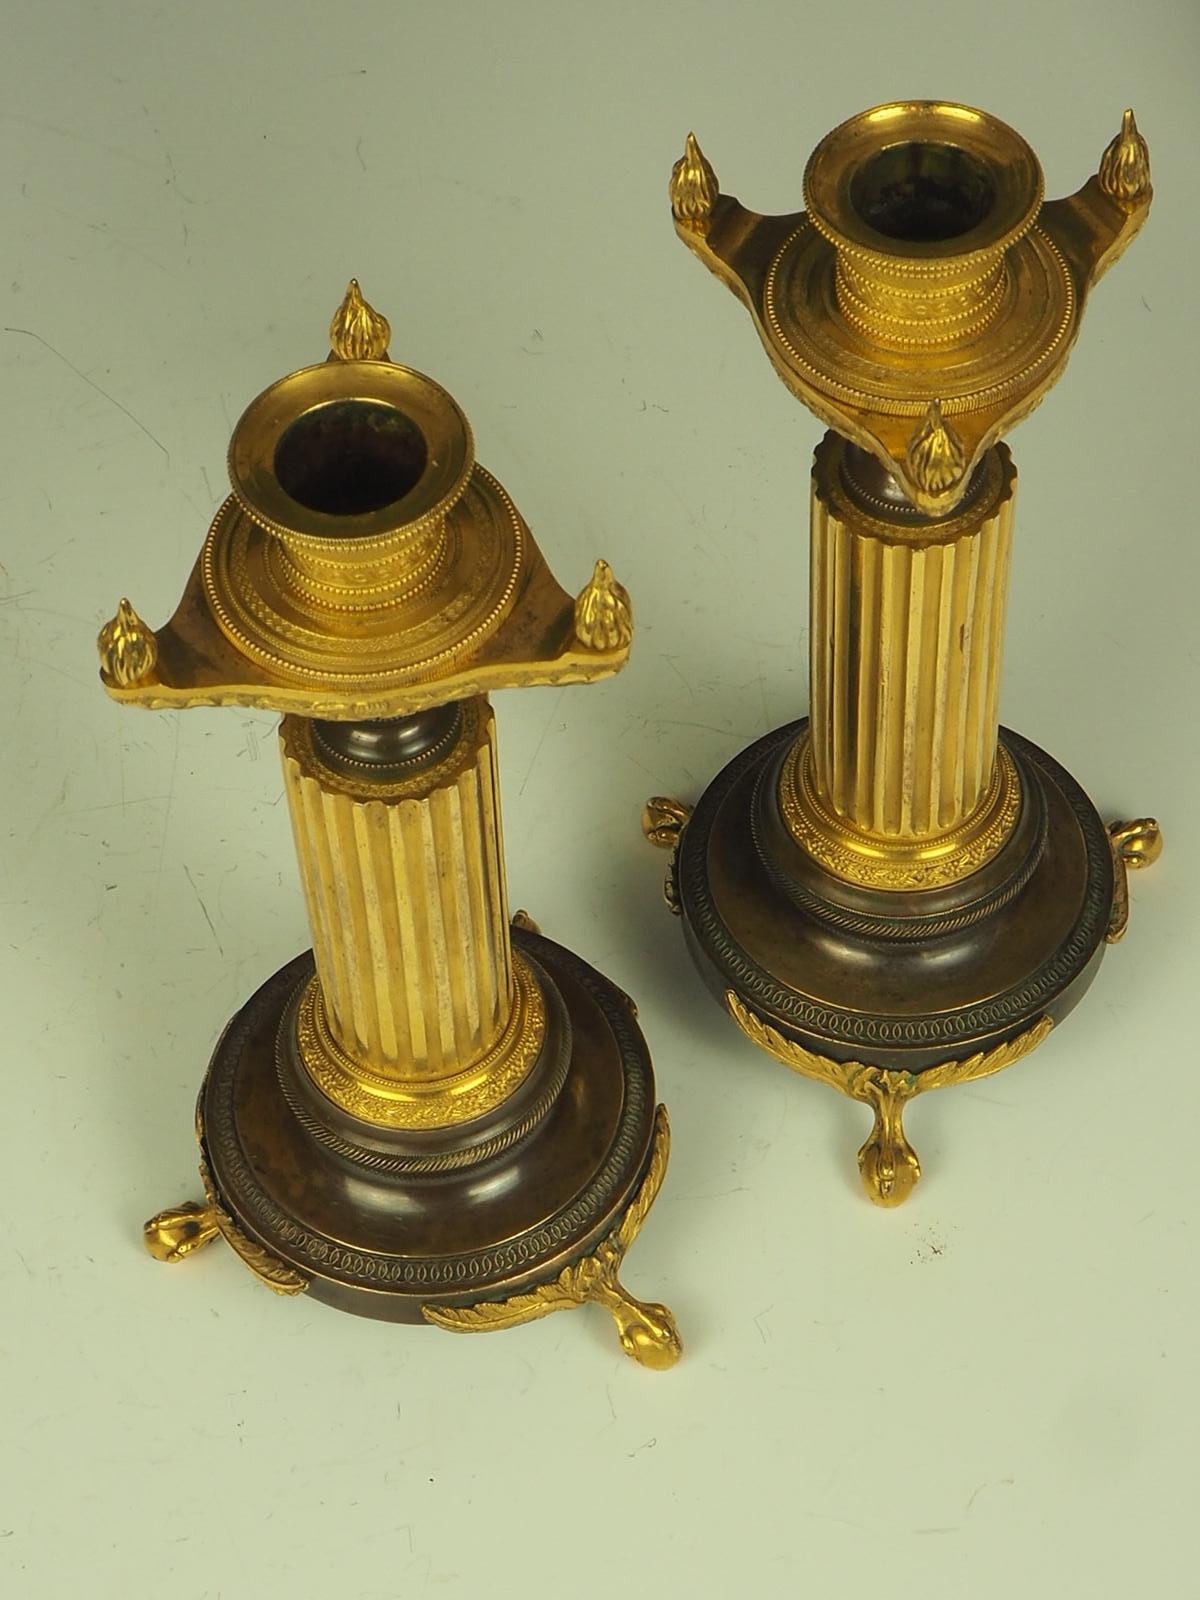 19th Century Pair of French Empire Bronze and Ormolu Candleholders, circa 1820